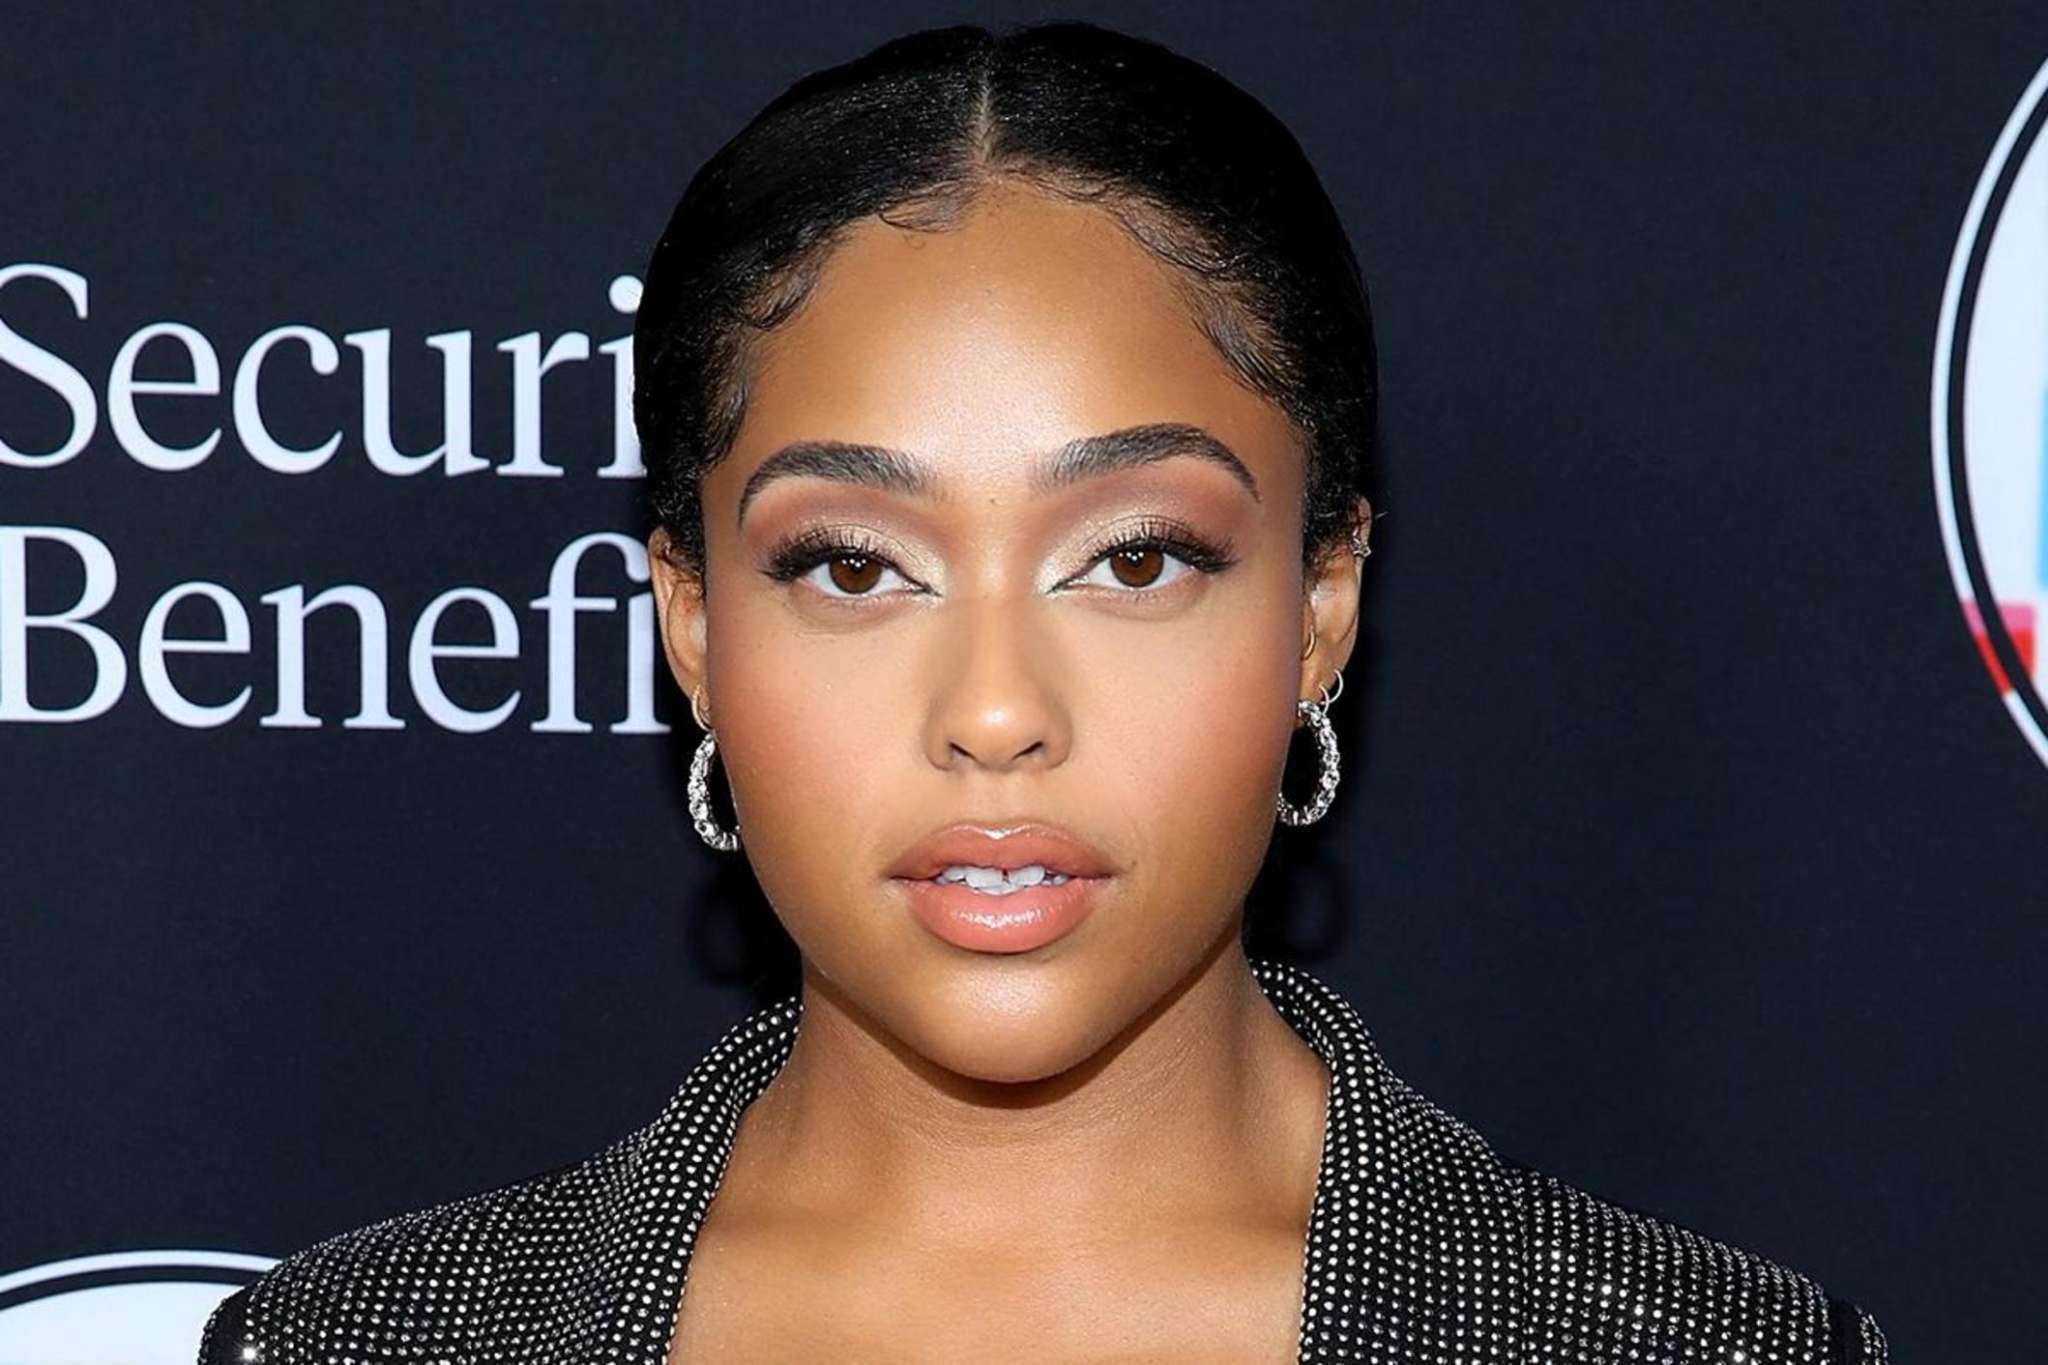 Jordyn Woods Shares An Impressive 'No Makeup, No Filter' Video - Check Out Her Natural Look!